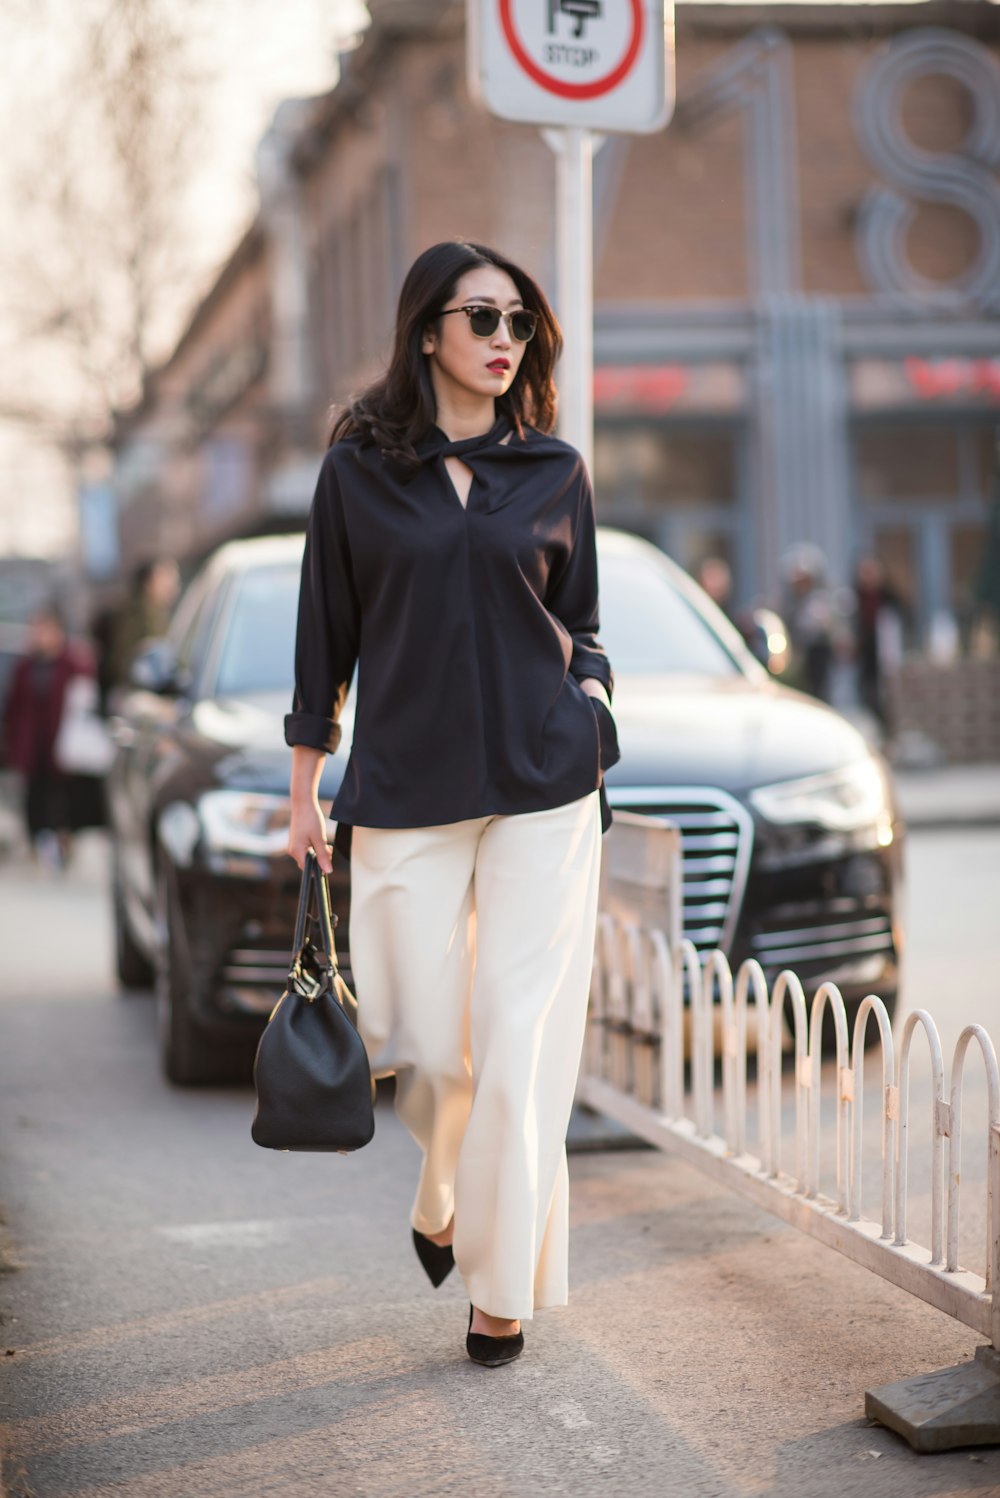 woman in black long sleeve shirt and white pants standing on sidewalk during daytime